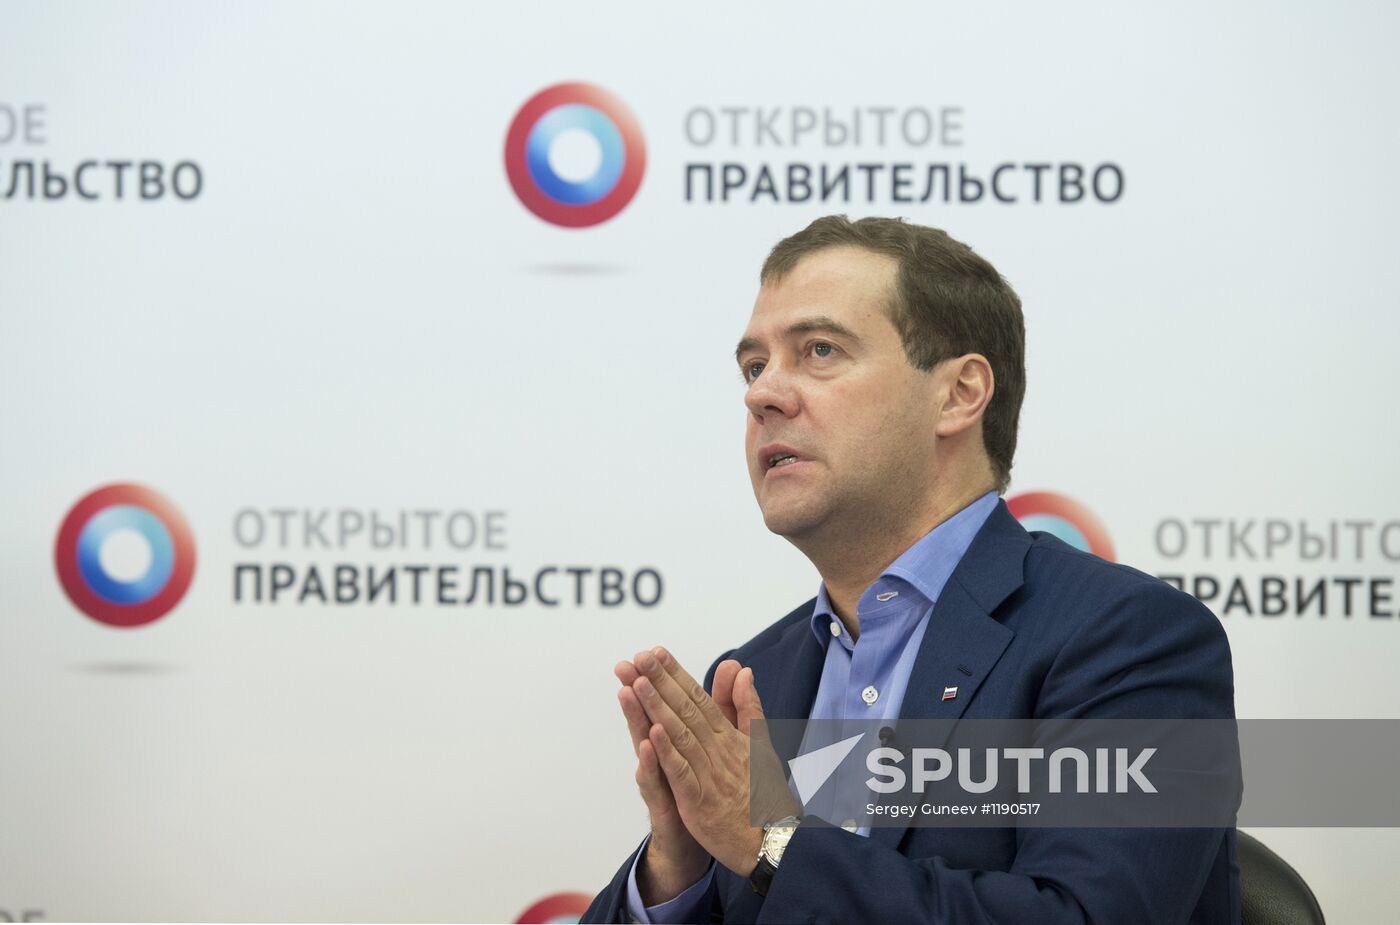 Dmitry Medvedev during Open Government meeting